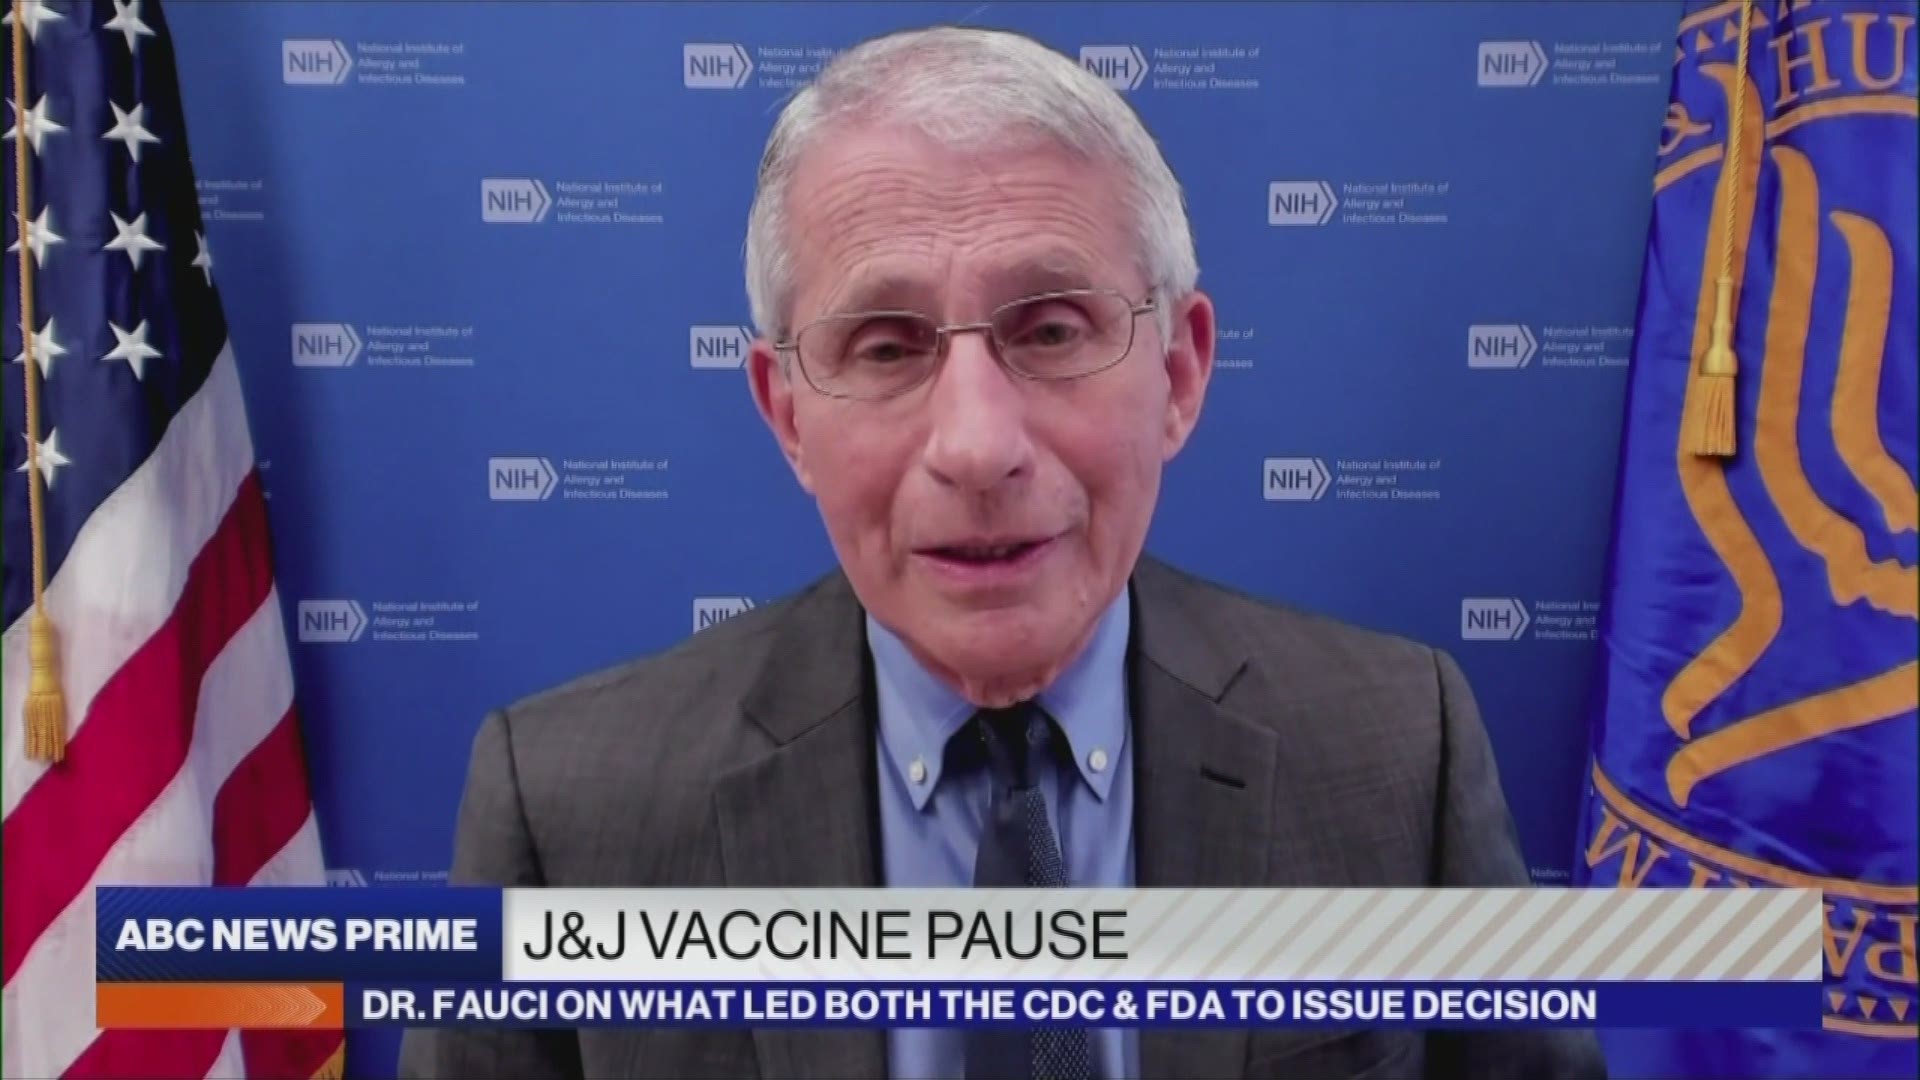 The Biden administration is stepping up its outreach efforts to get more Americans vaccinated.